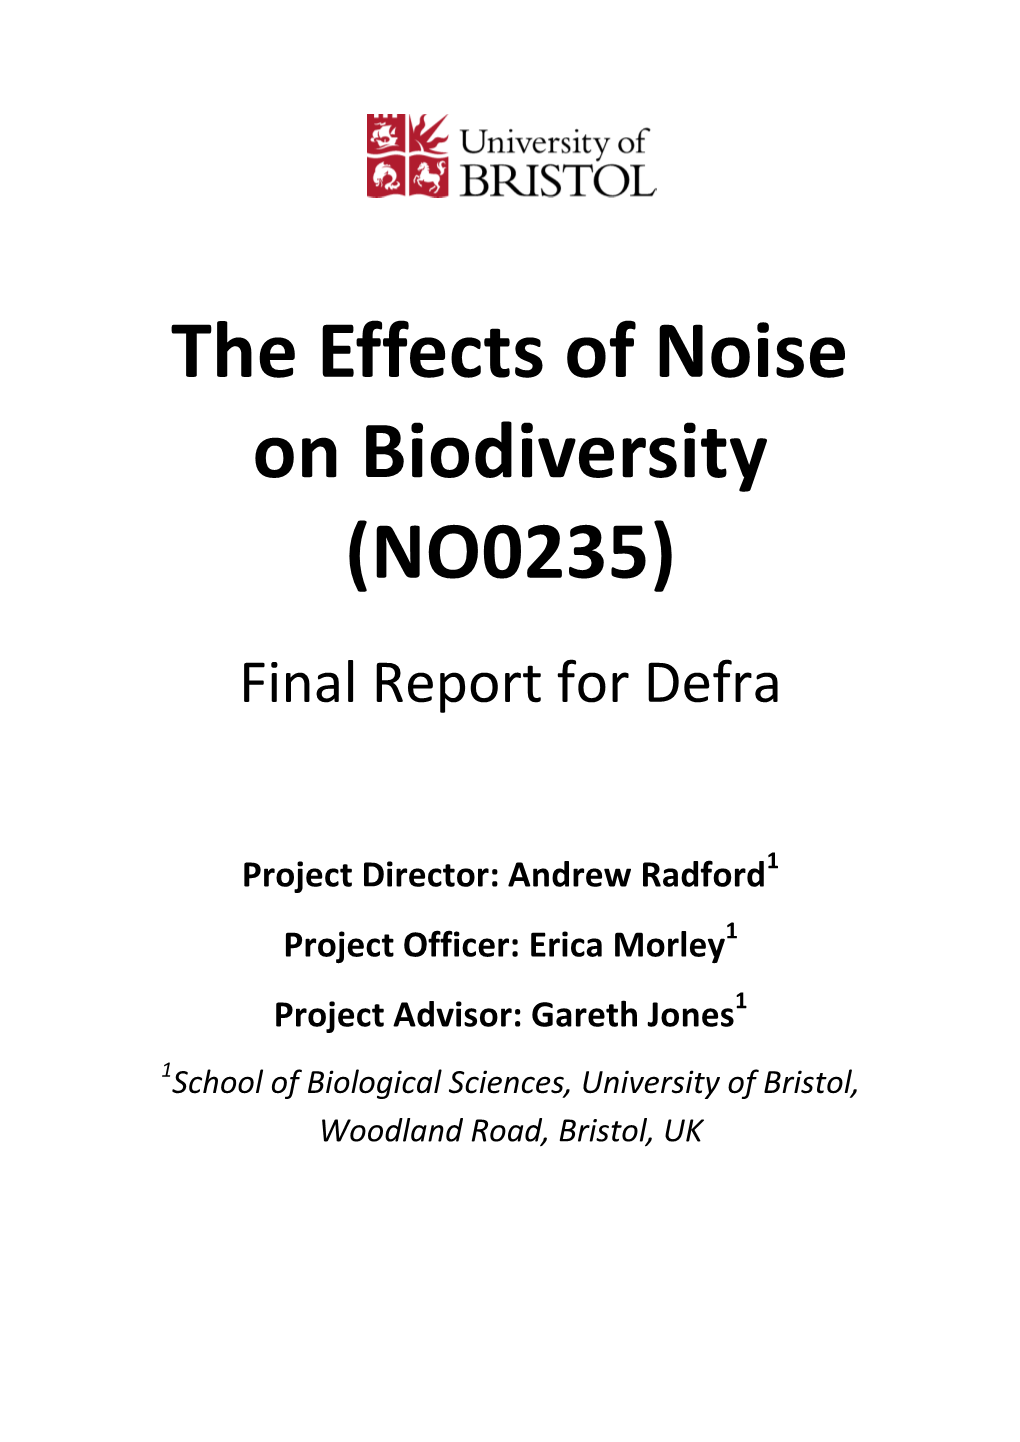 The Effects of Noise on Biodiversity (NO0235)